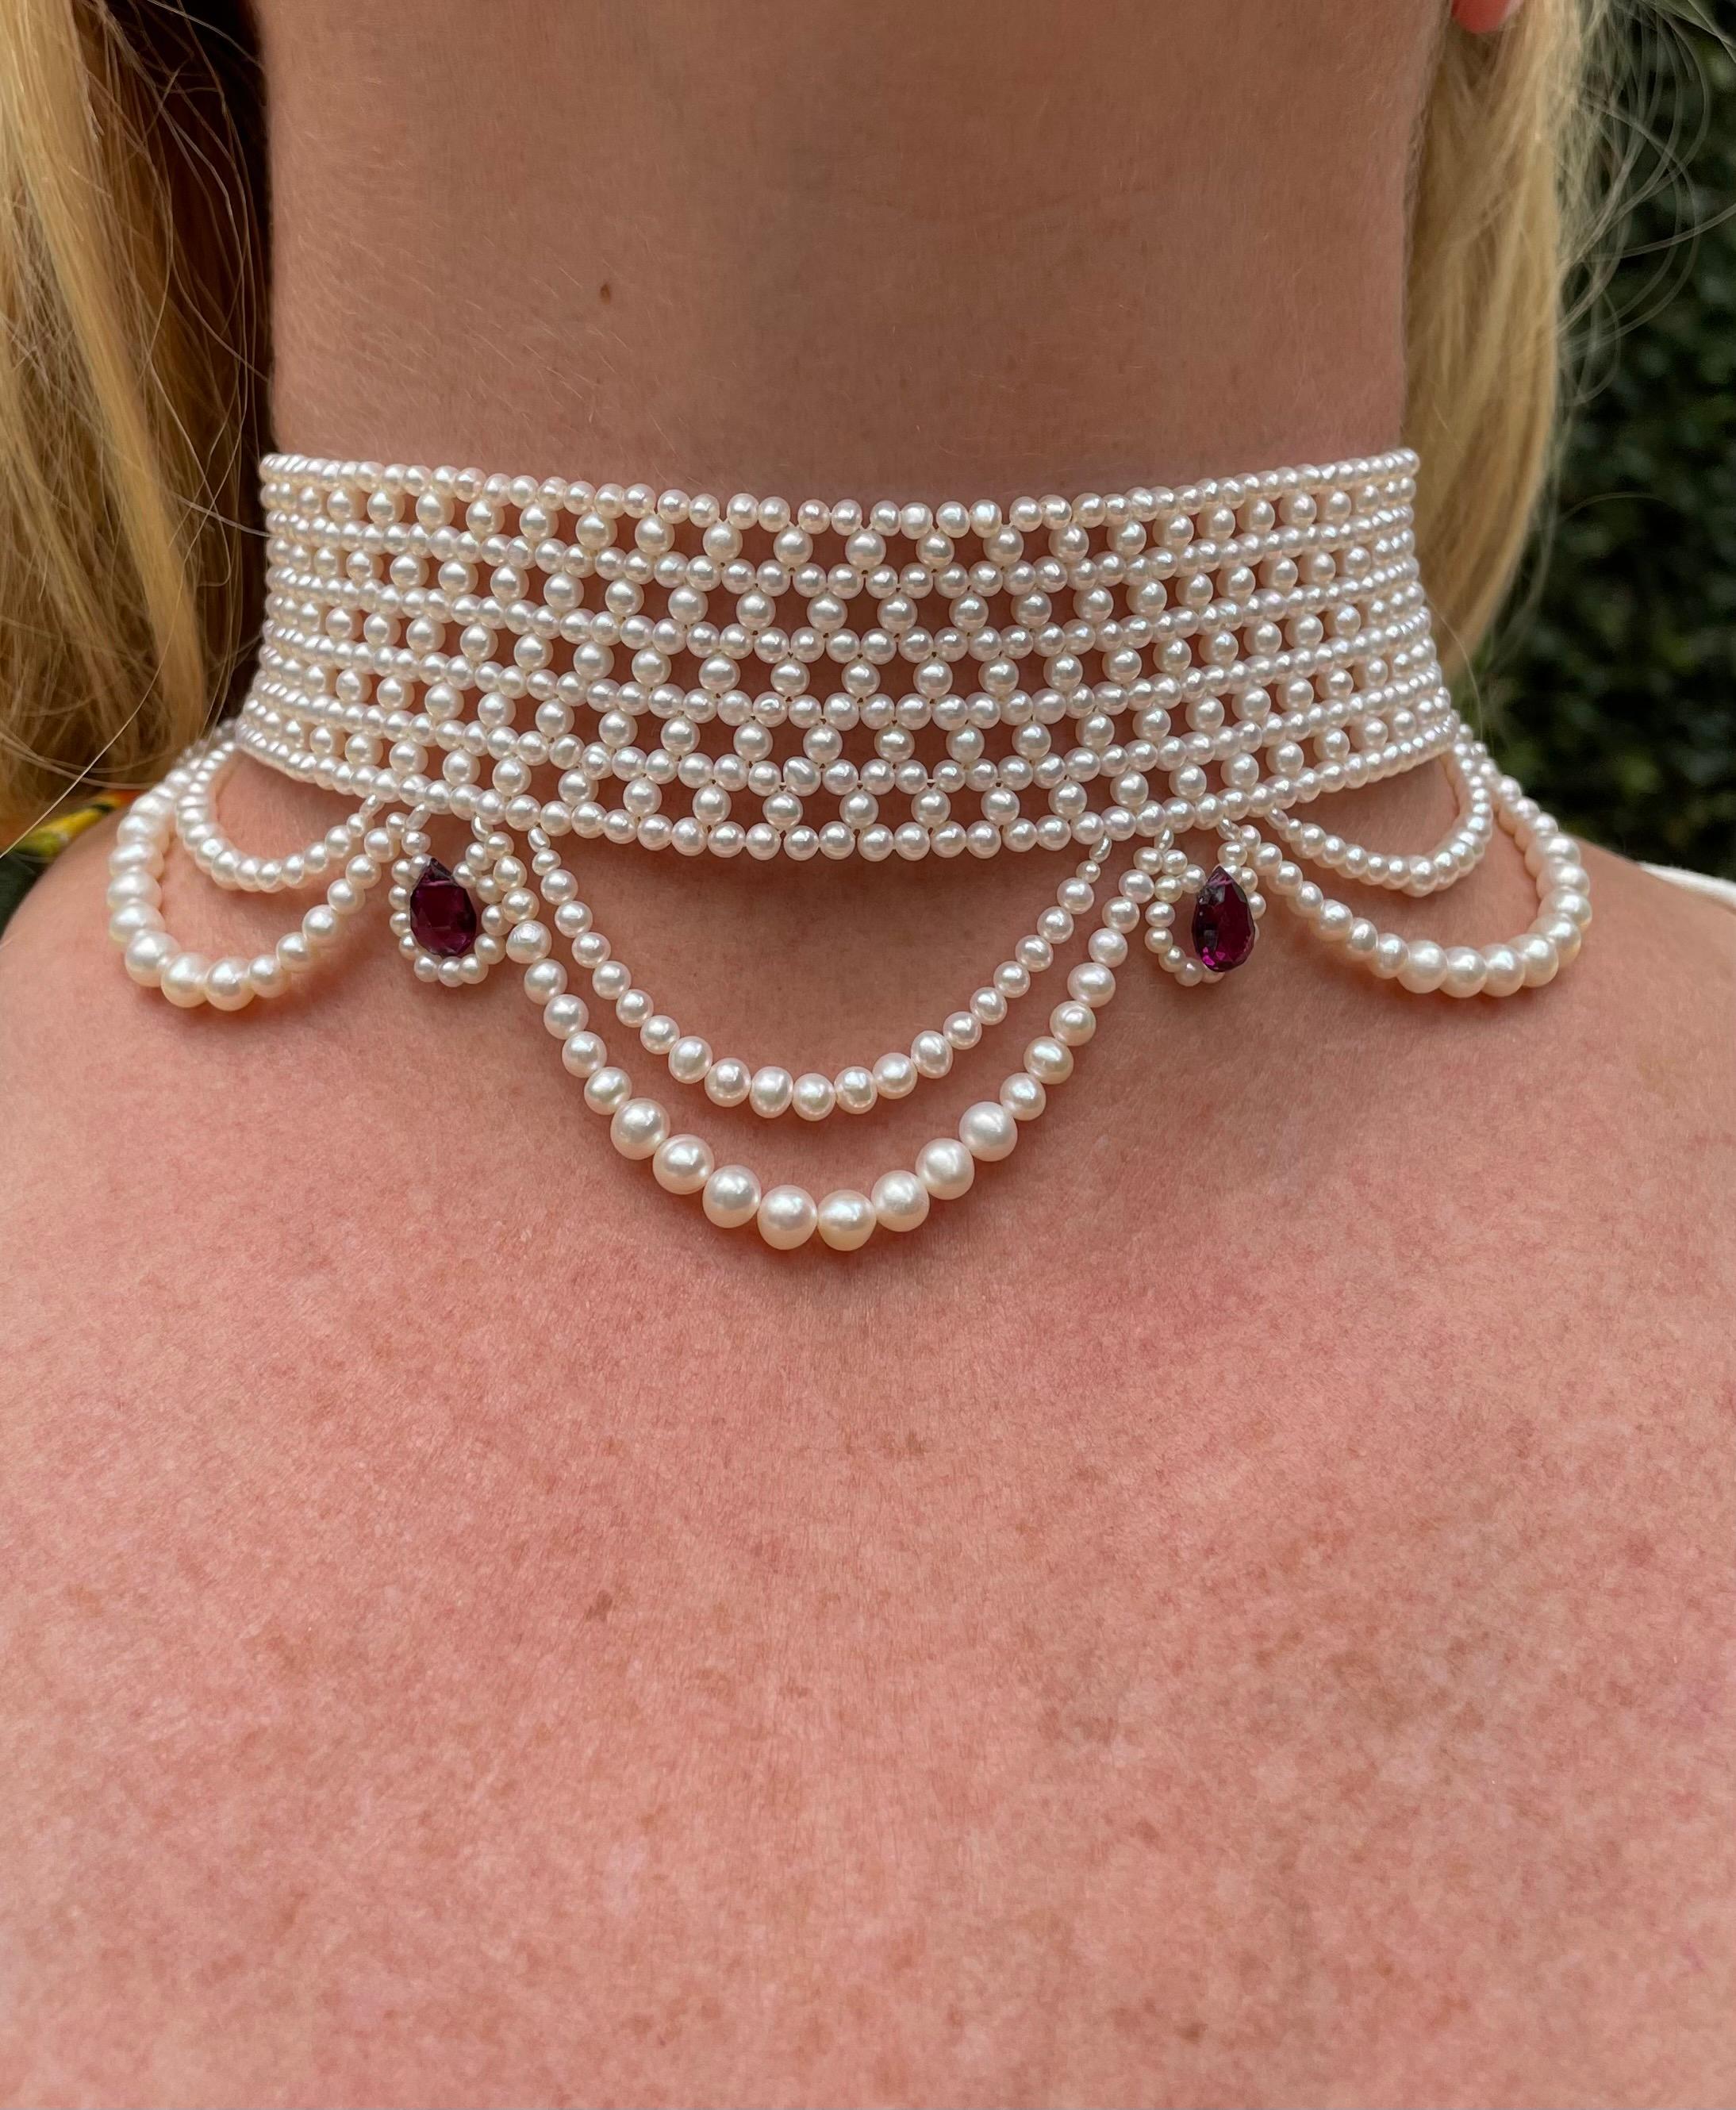 Marina J Woven Pearl Choker with Pearl Drapes, Garnet Briolettes and 14 K Gold 6